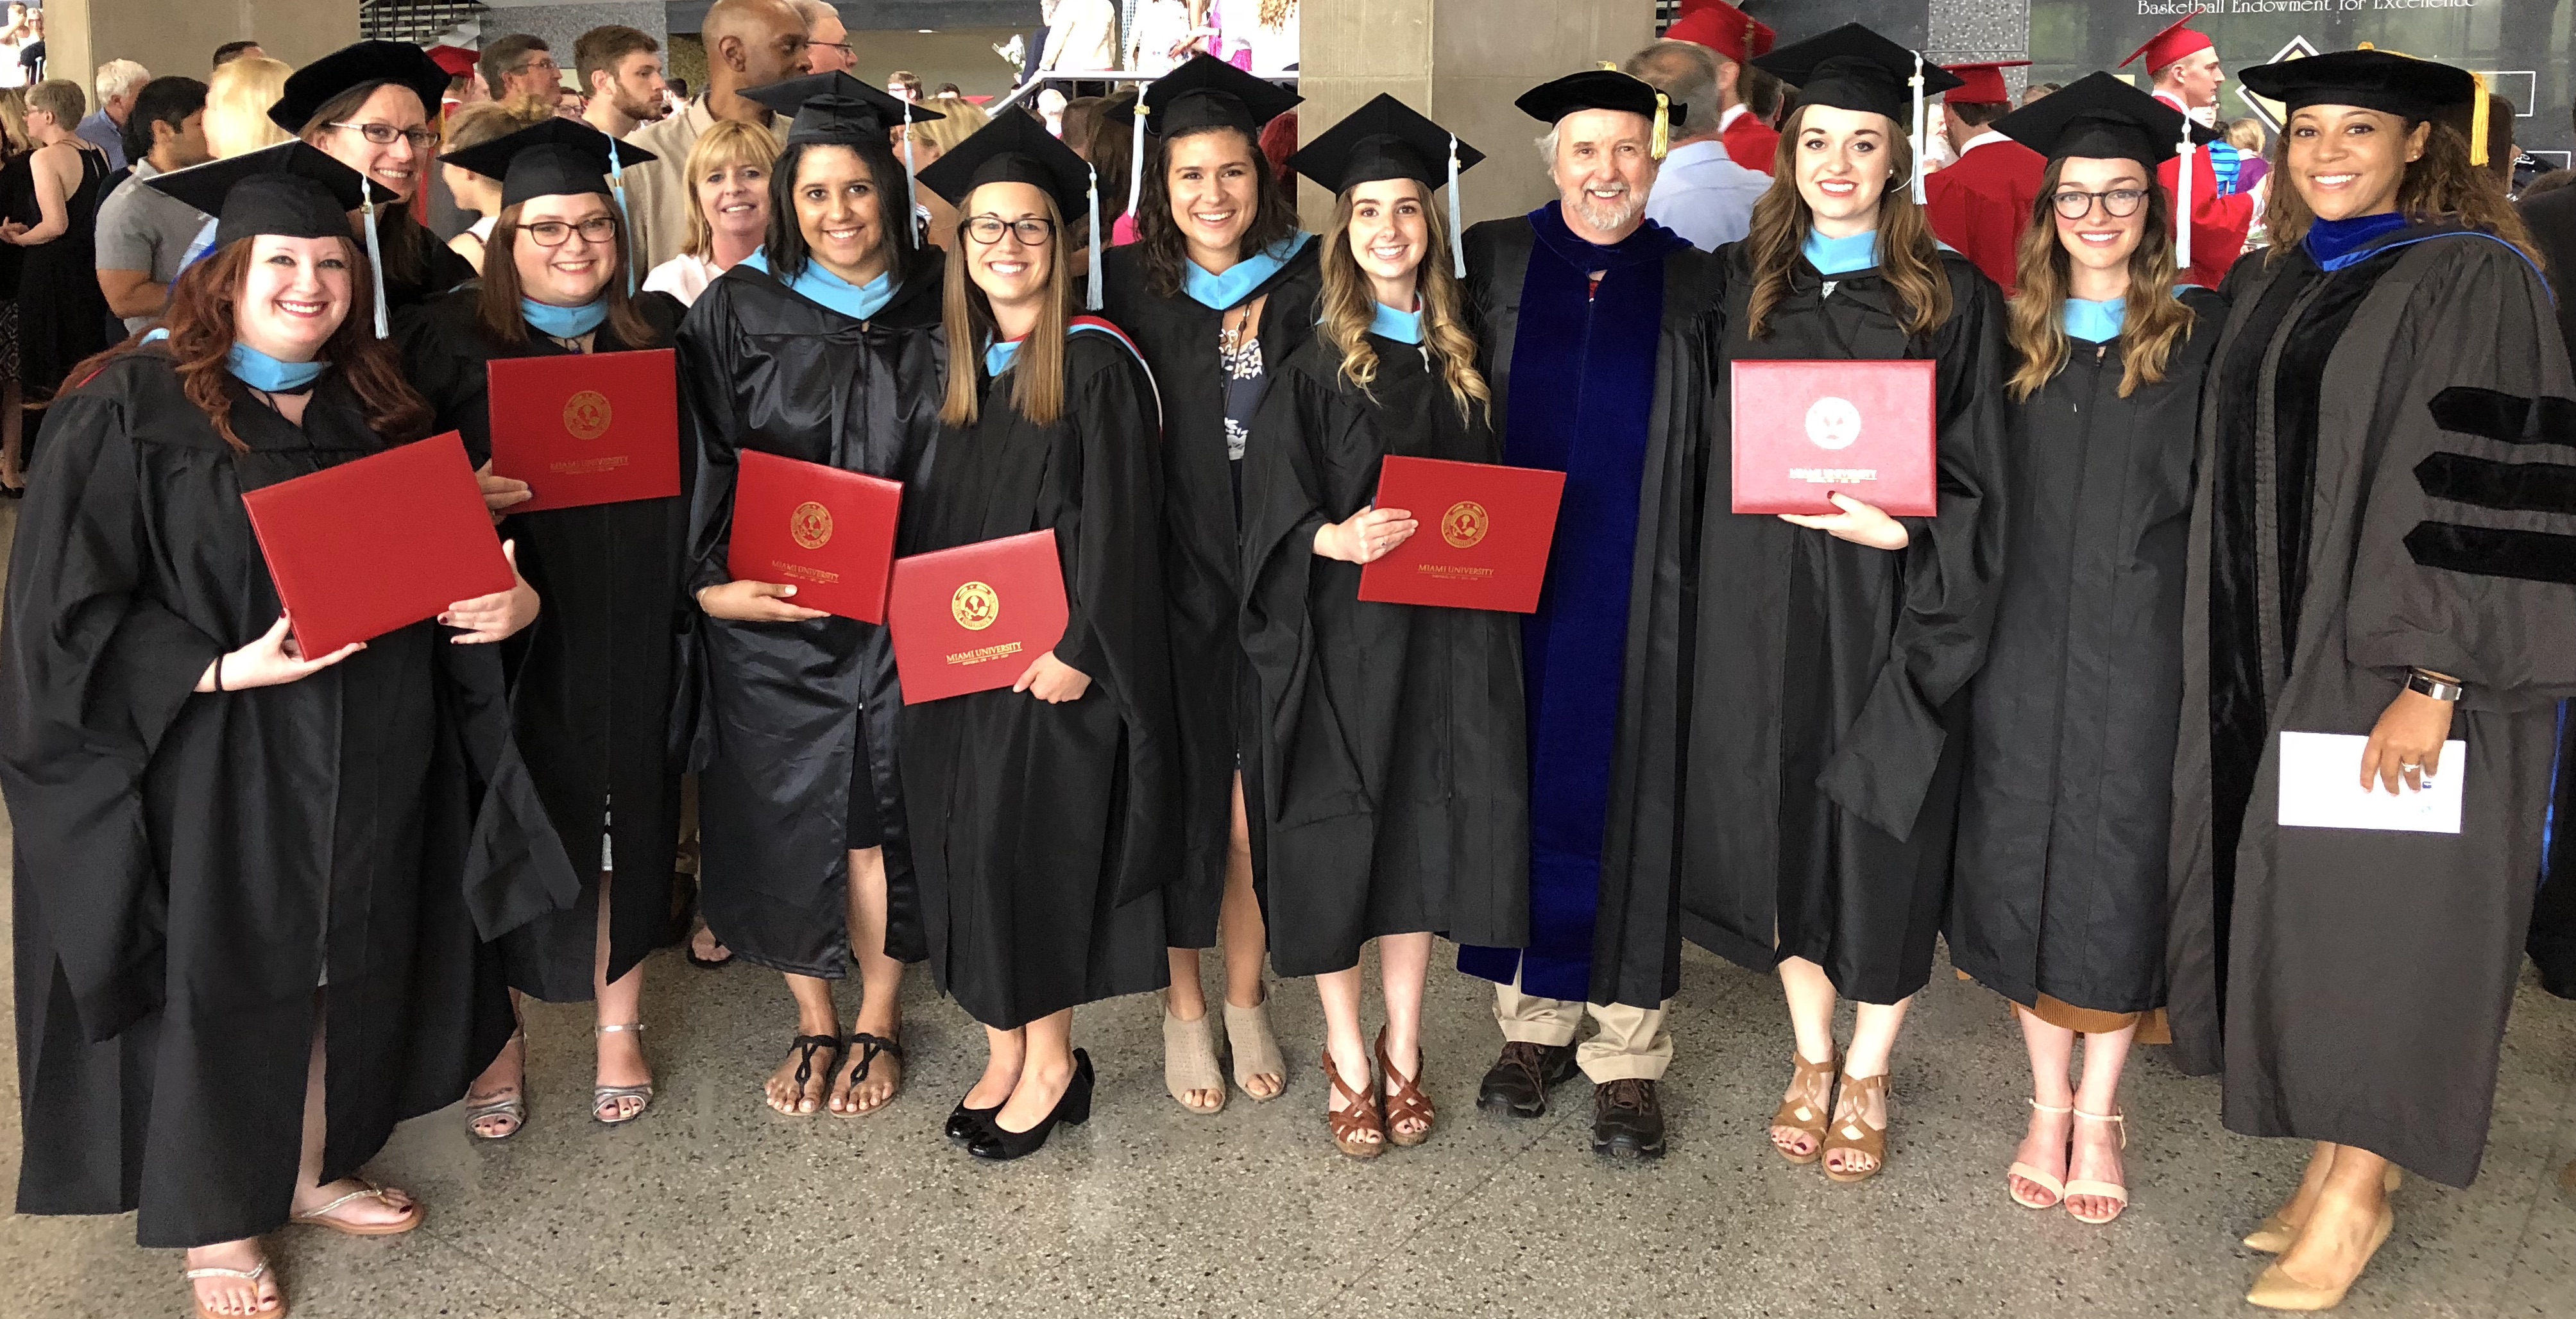 school of psychology graduates pose for picture together